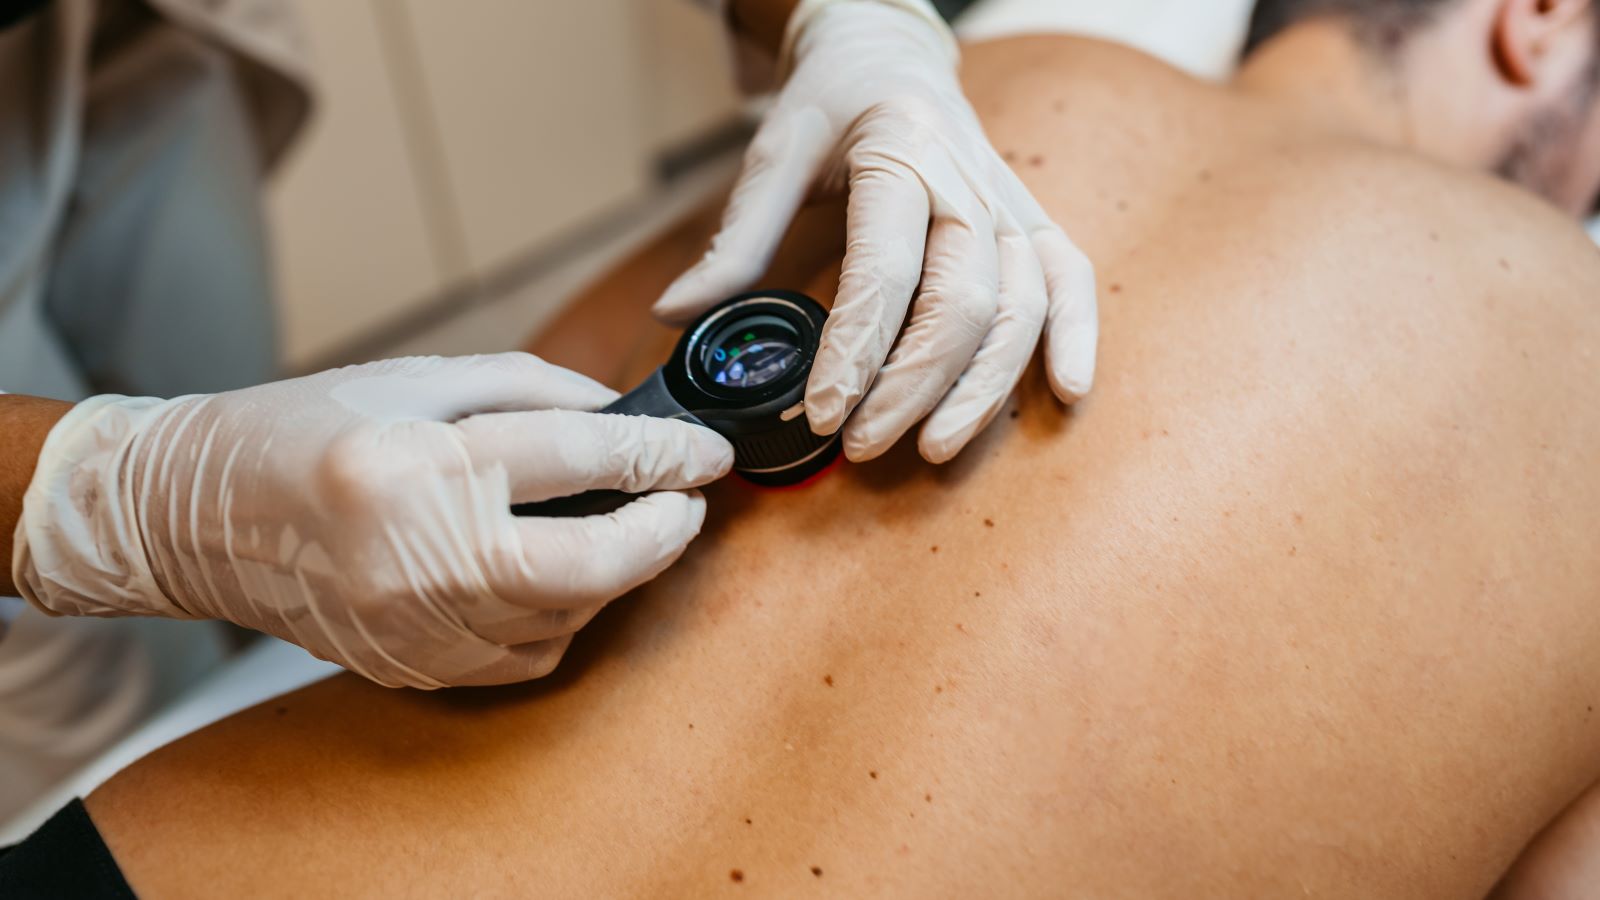 Where to Check for Skin Cancer, Based on Your Gender